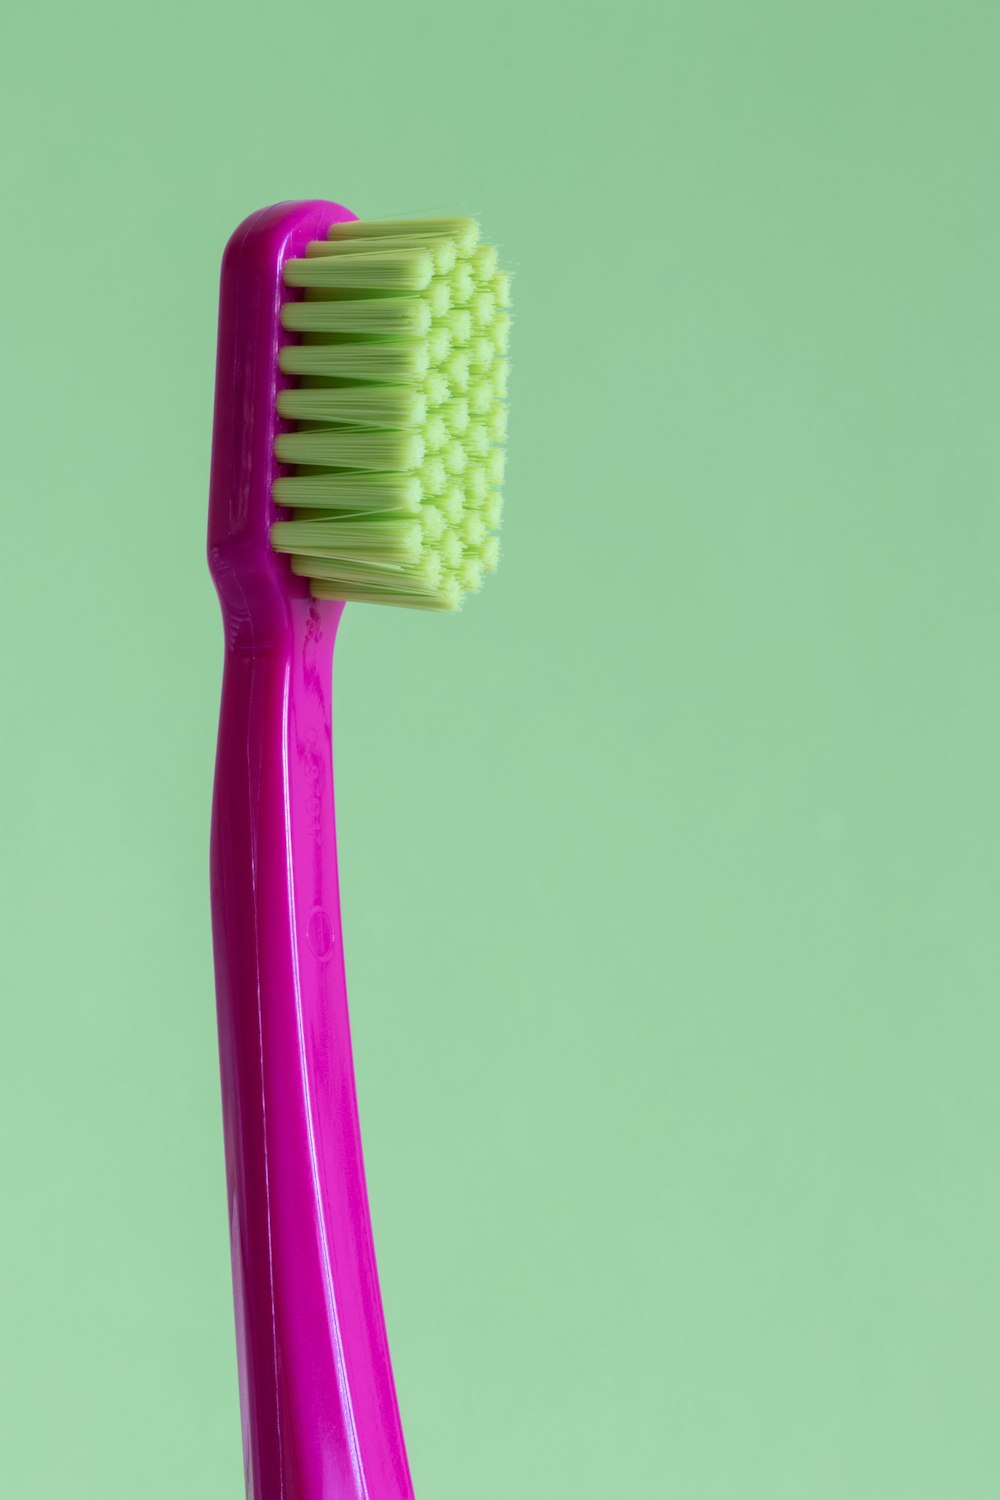 Download Toothbrush Pictures Download Free Images On Unsplash